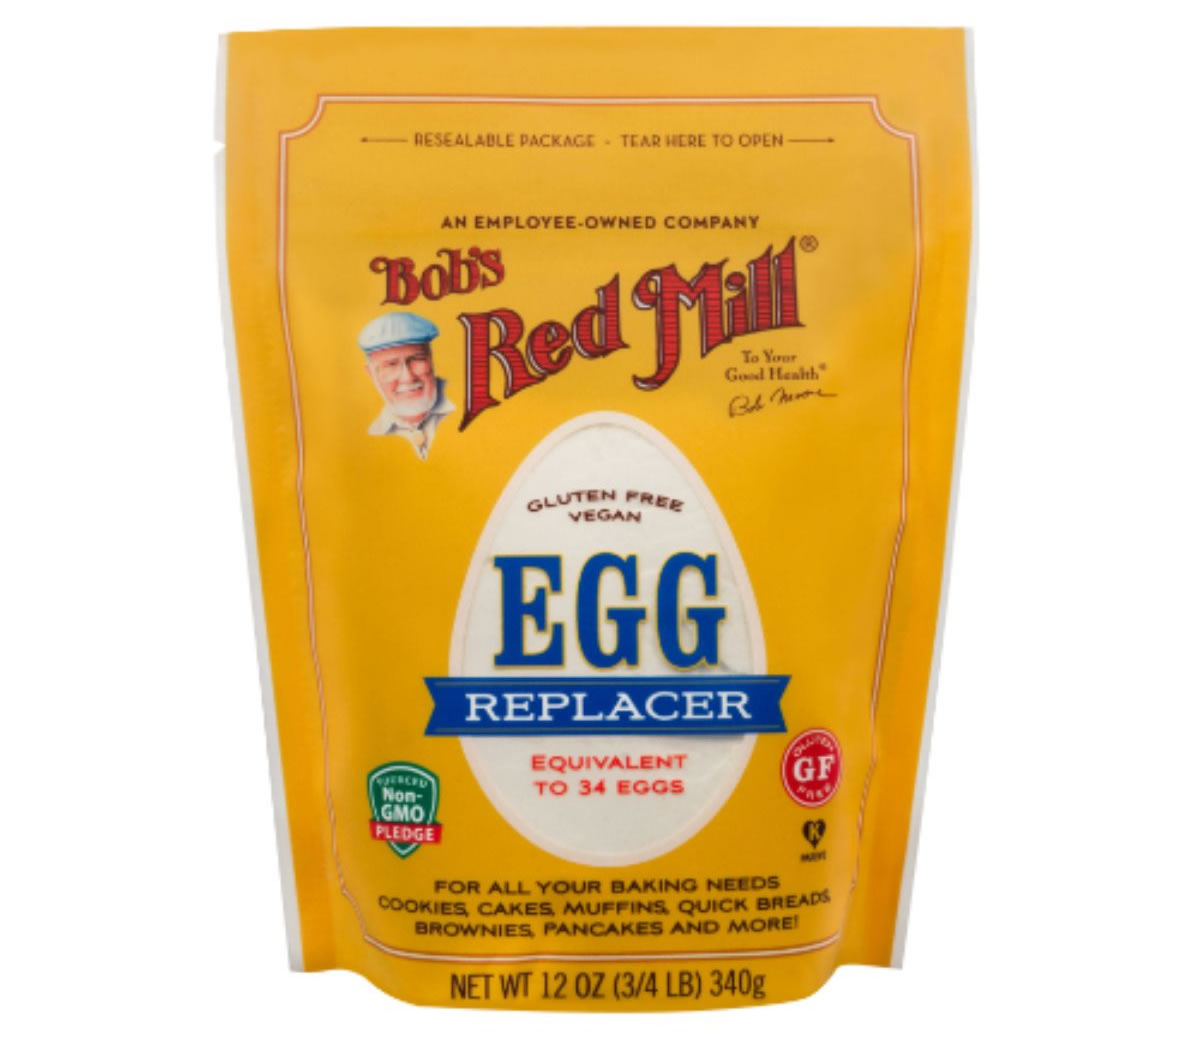 Bobs Red Mill, Egg Replacer, 340g